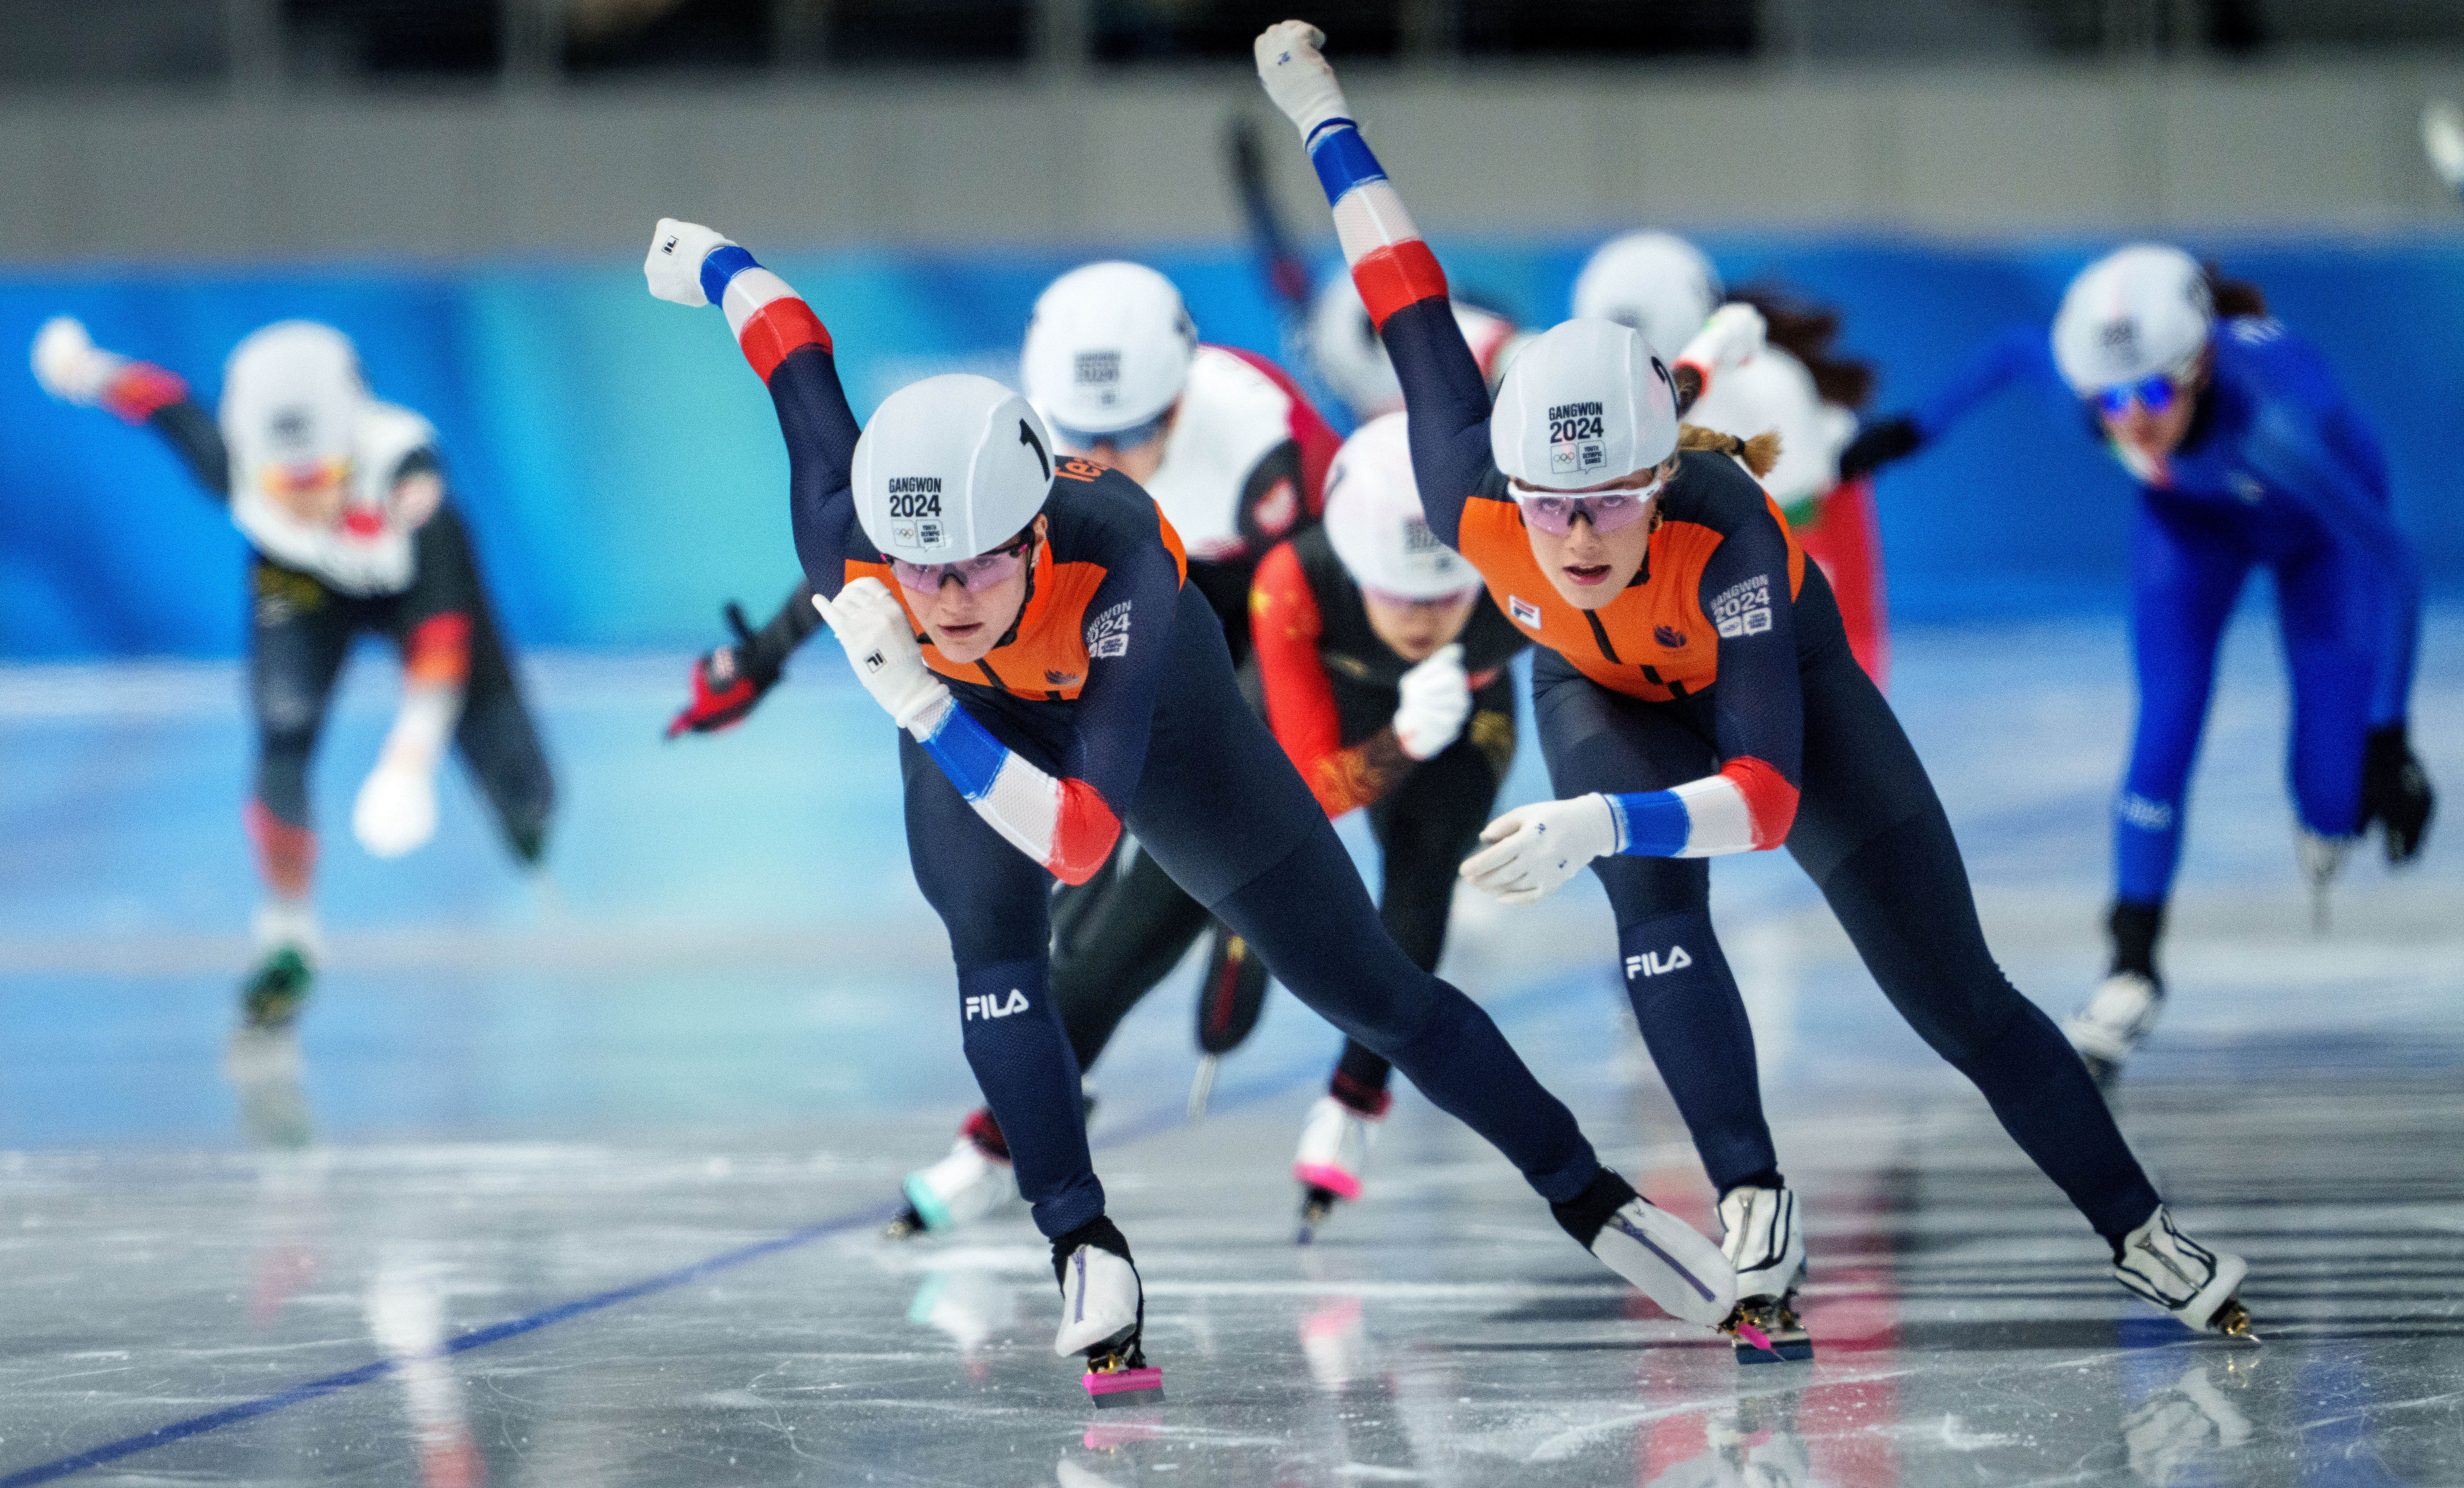 Angel Daleman (NED) and Jasmijn Veenhuis (NED) lead the field in the Speed Skating Women’s Mass Start Final